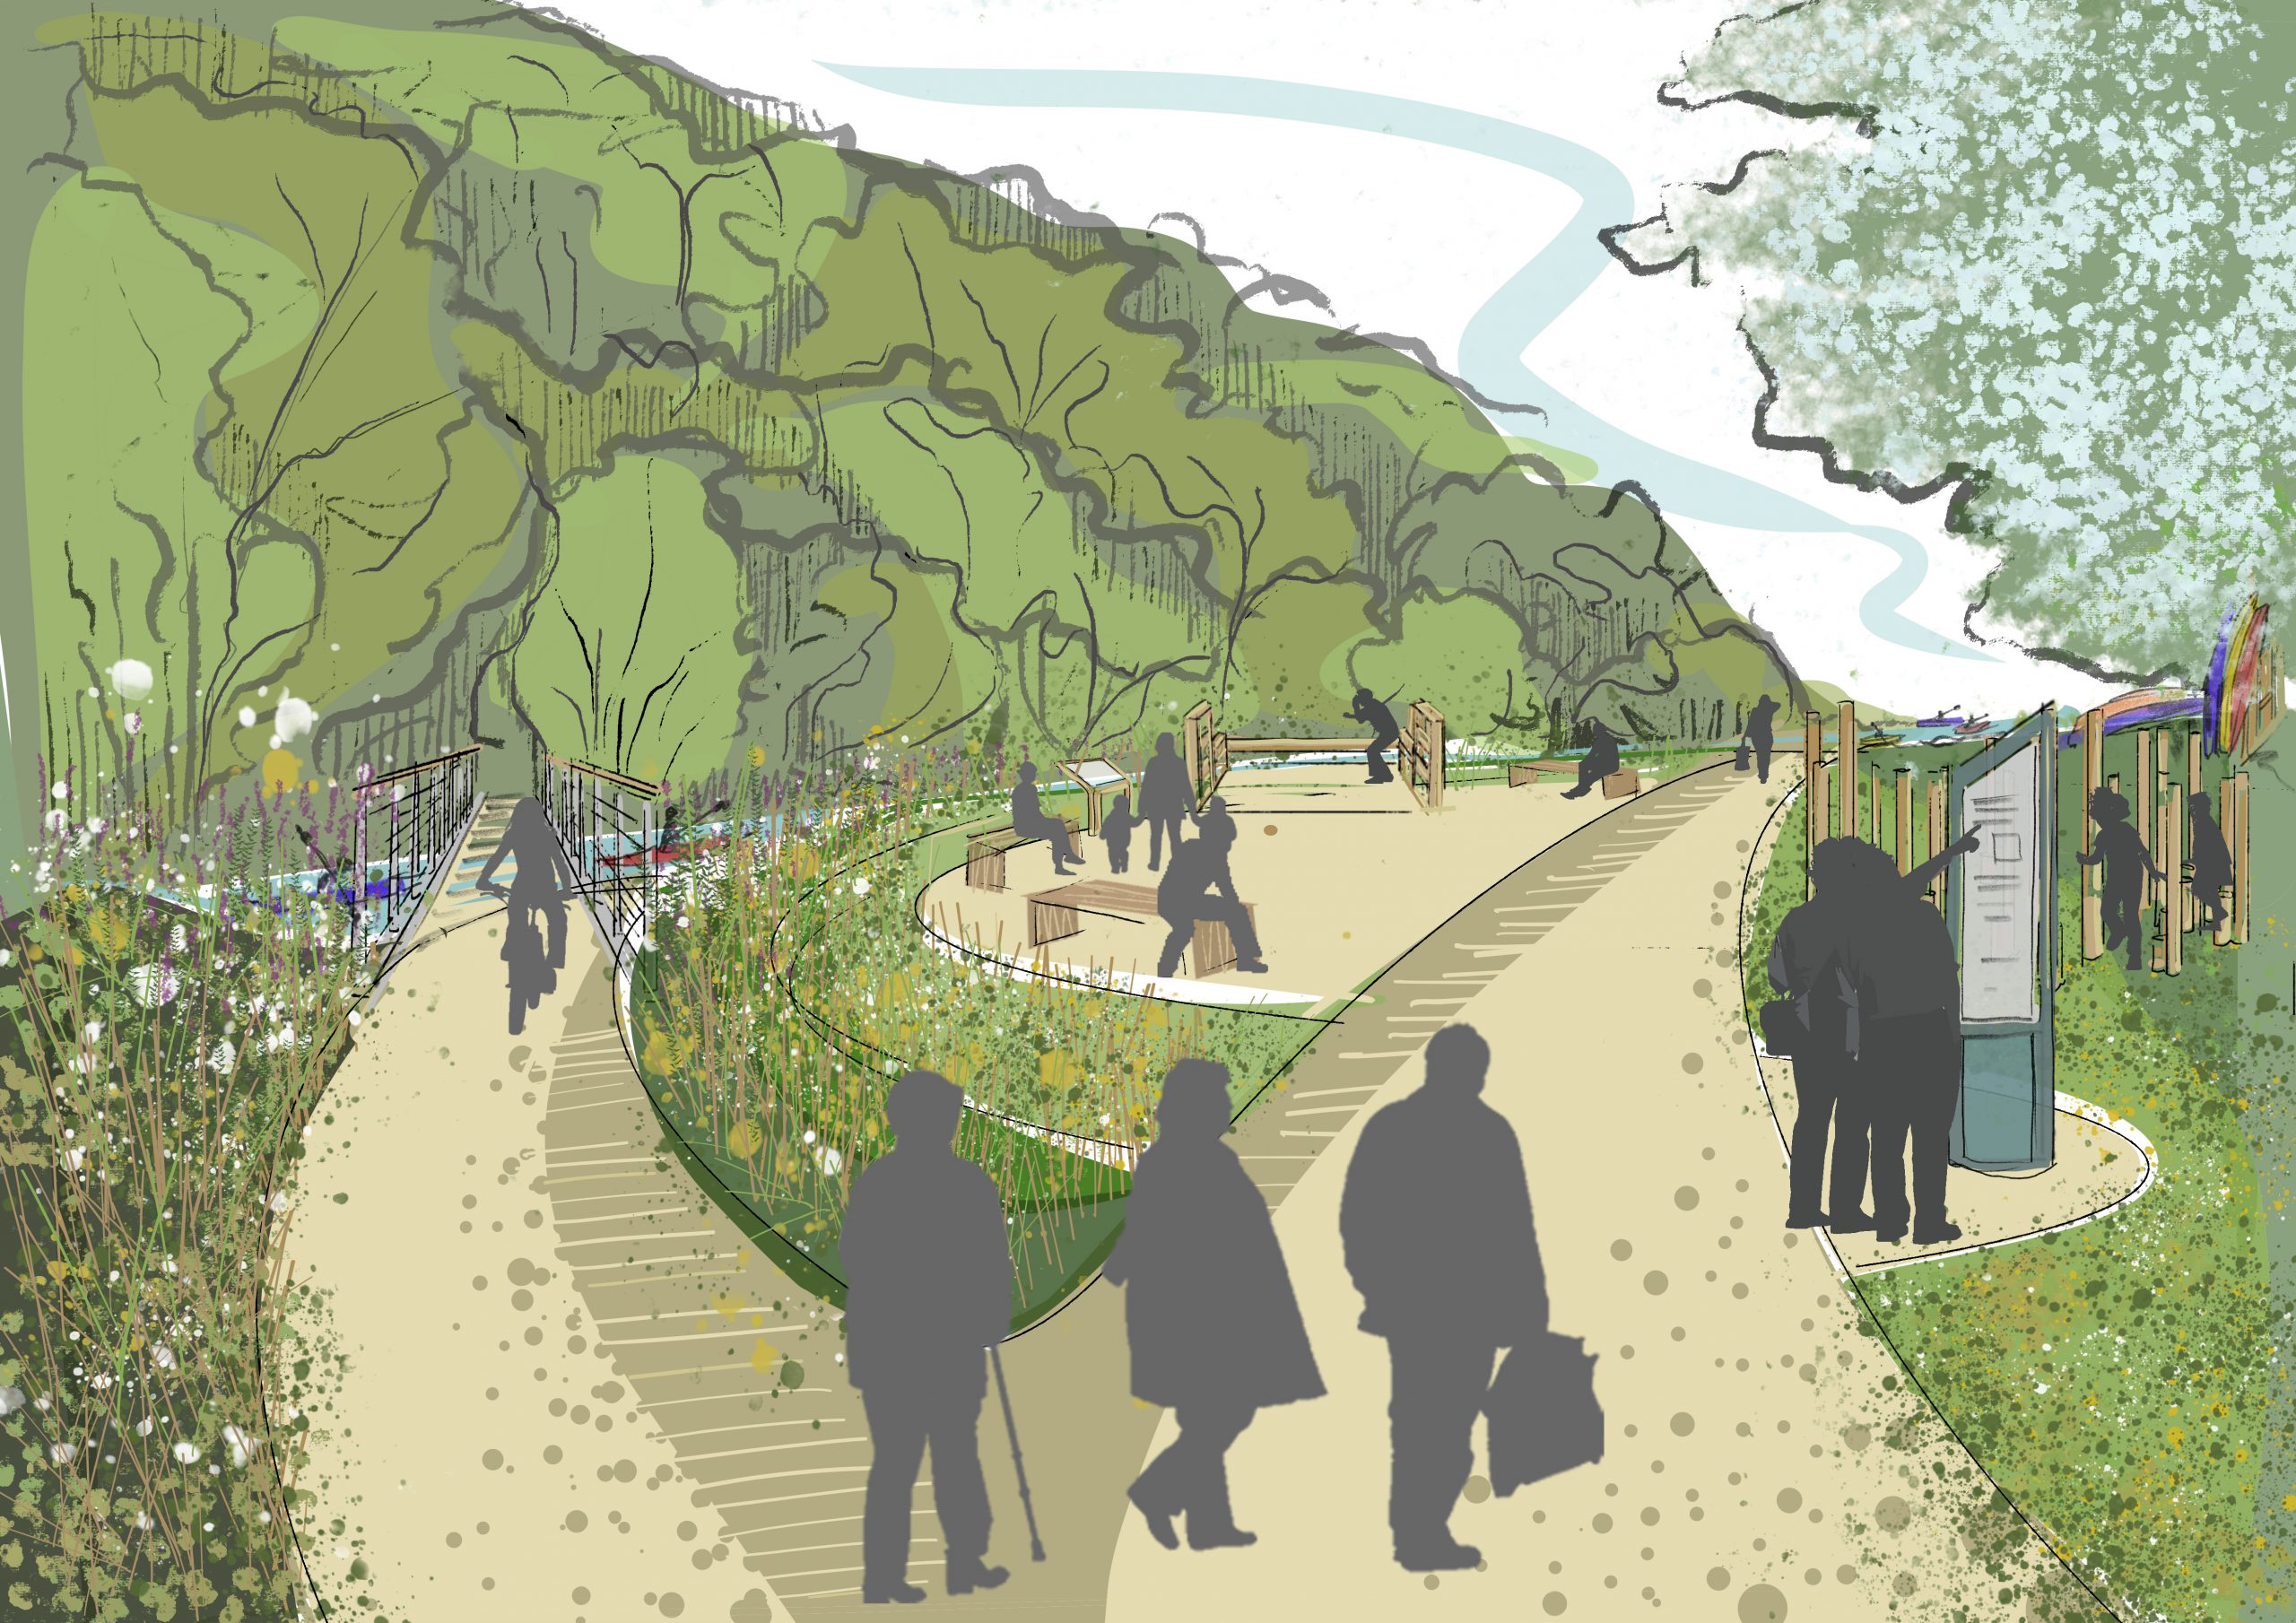 Illustration showing people walking down footpaths surrounded by trees and a river walkway